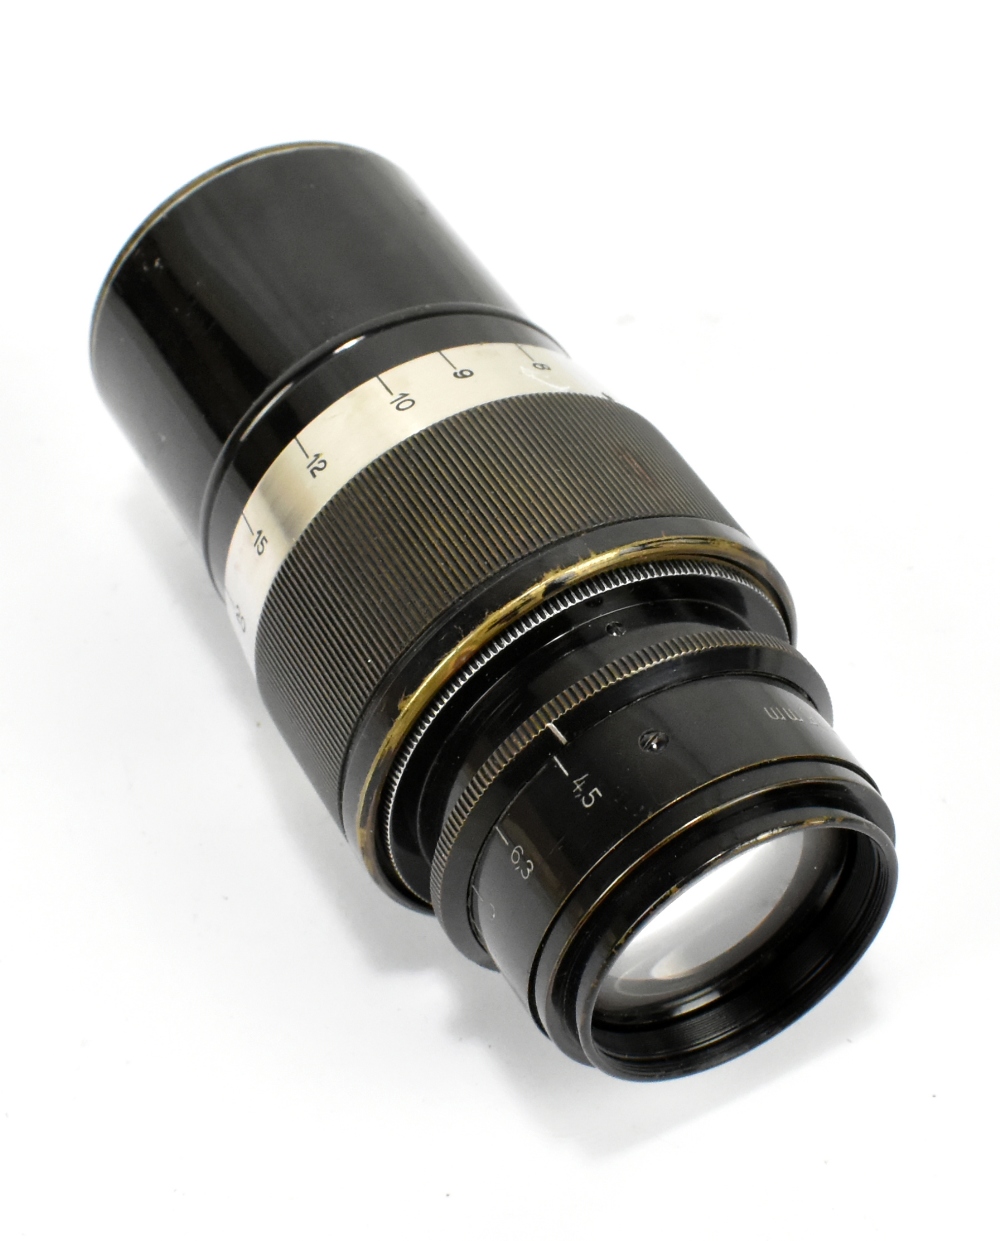 LEITZ; a Hektor non-standard A36 lens, circa 1930, 1:4,5 F=135mm, with nickle and black barrel,